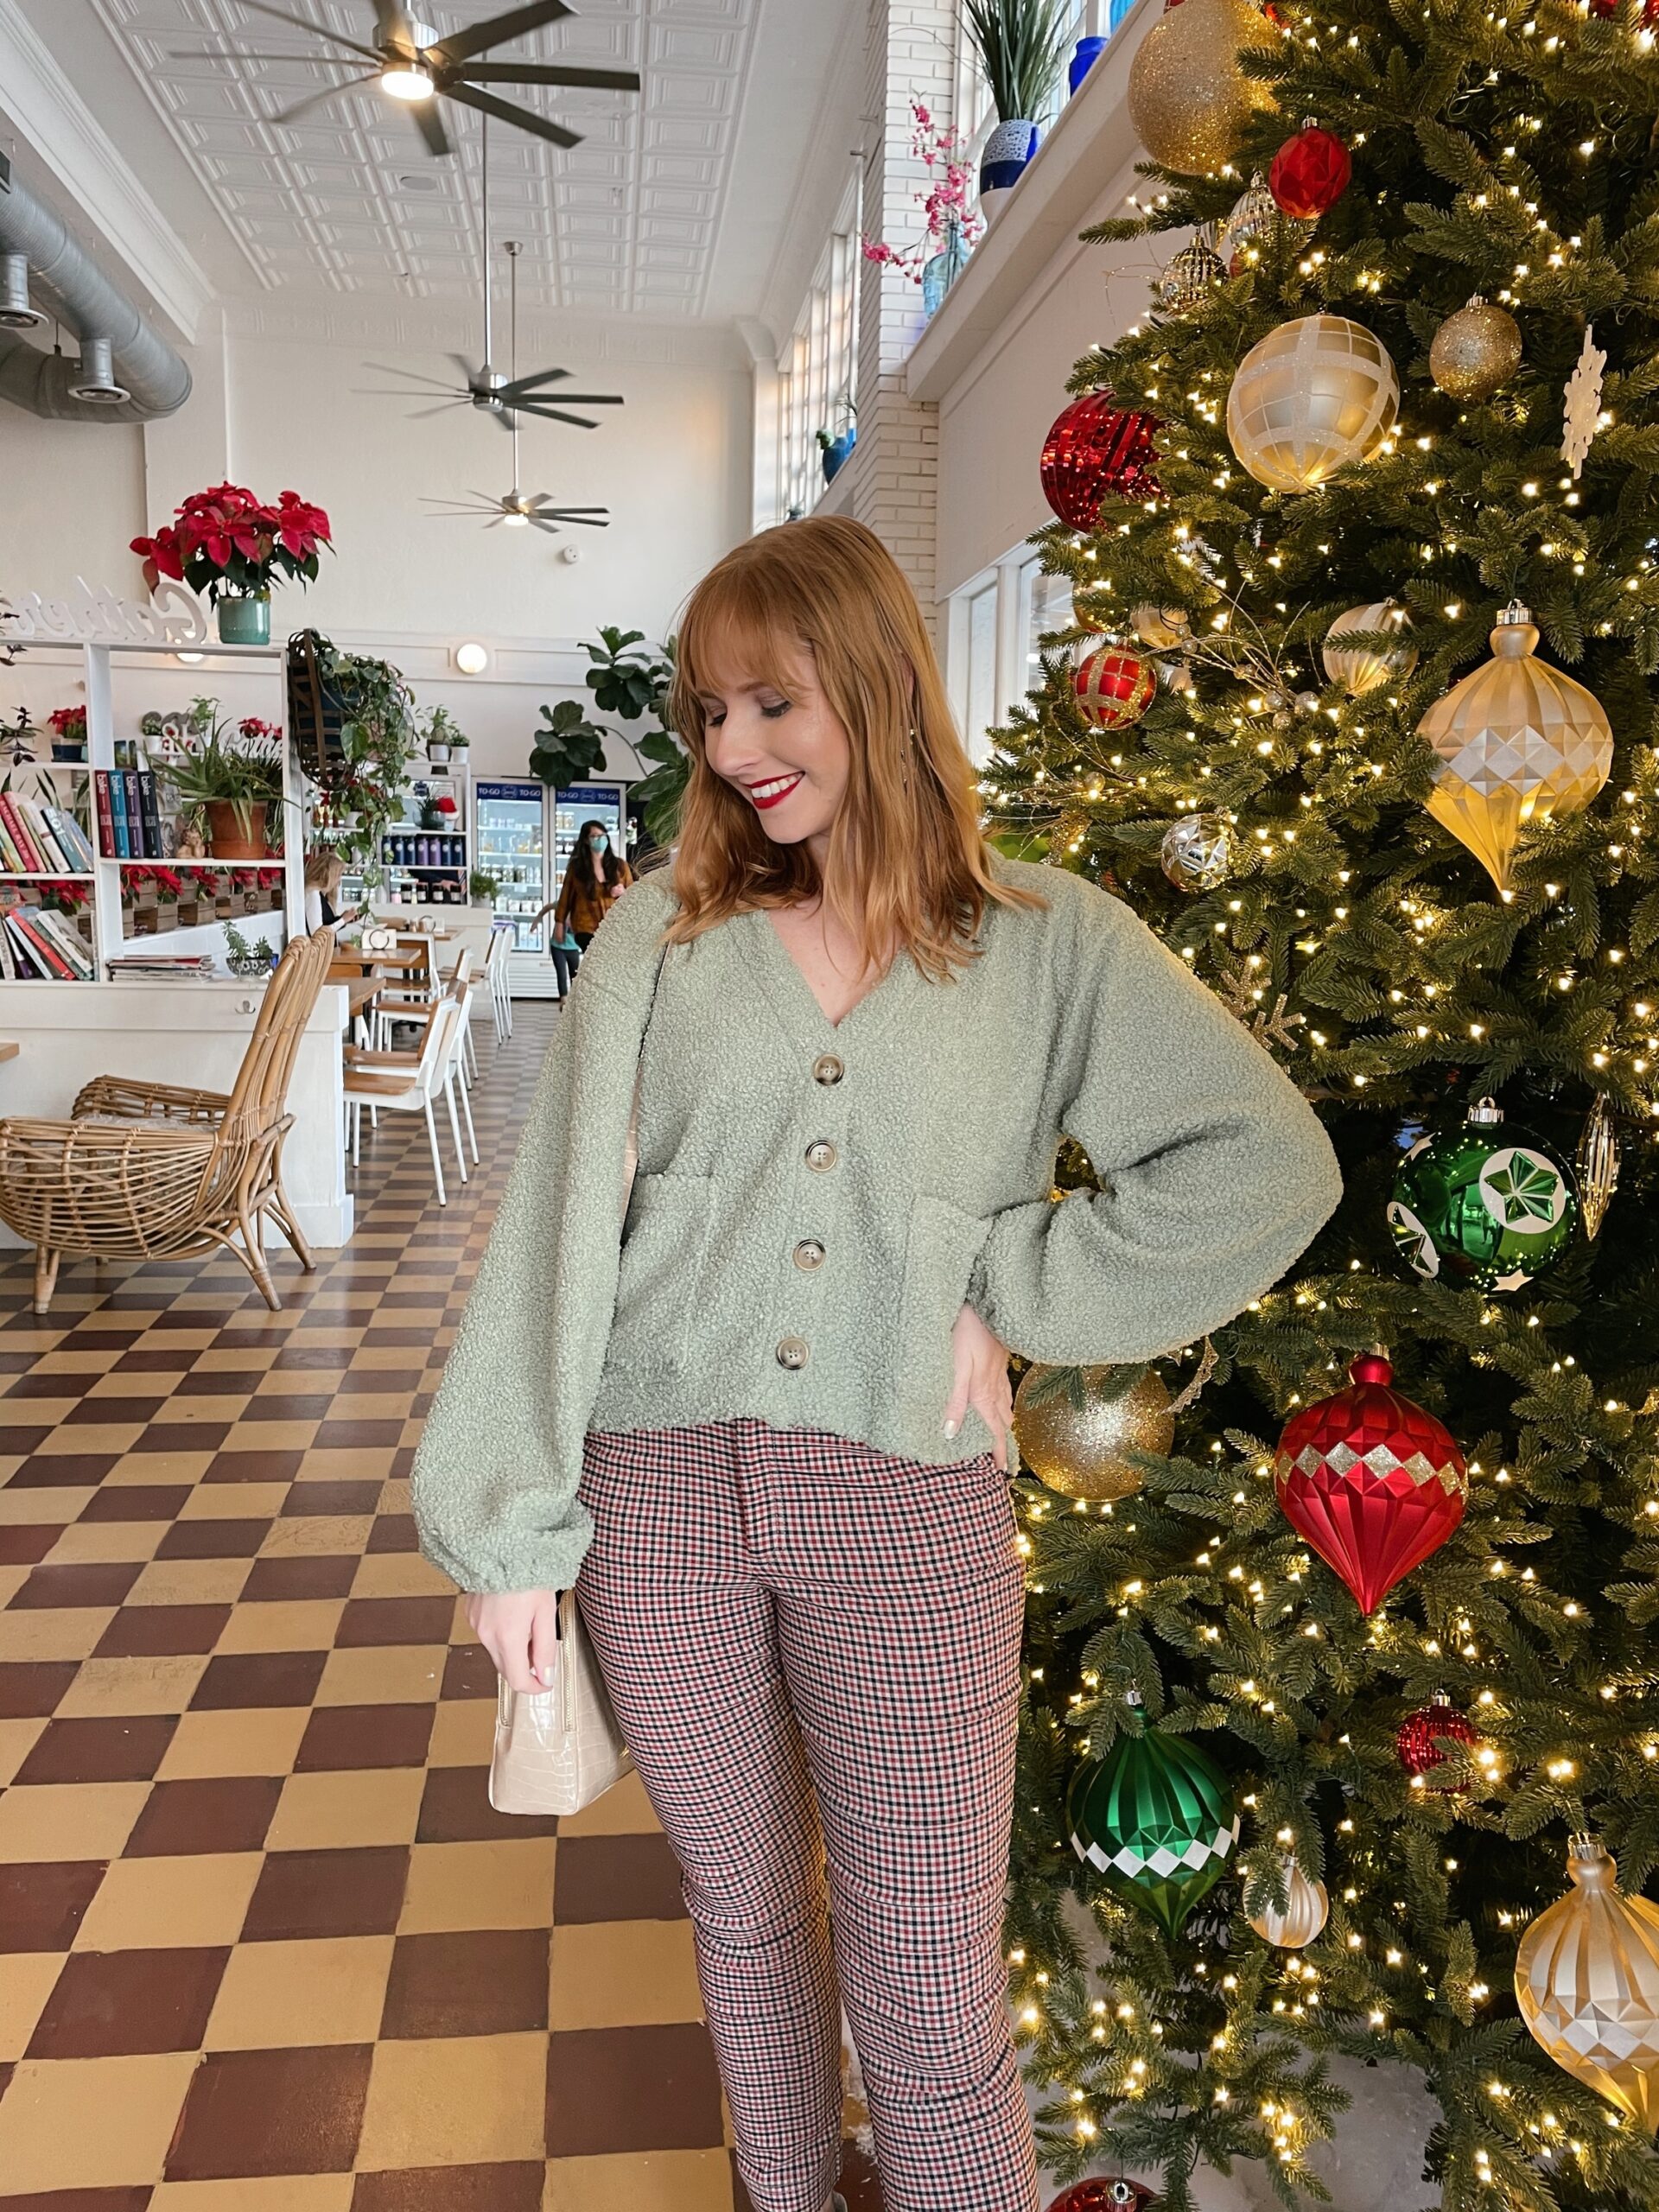 6 Easy Holiday Fashion Trends to Try This Season | Affordable by Amanda